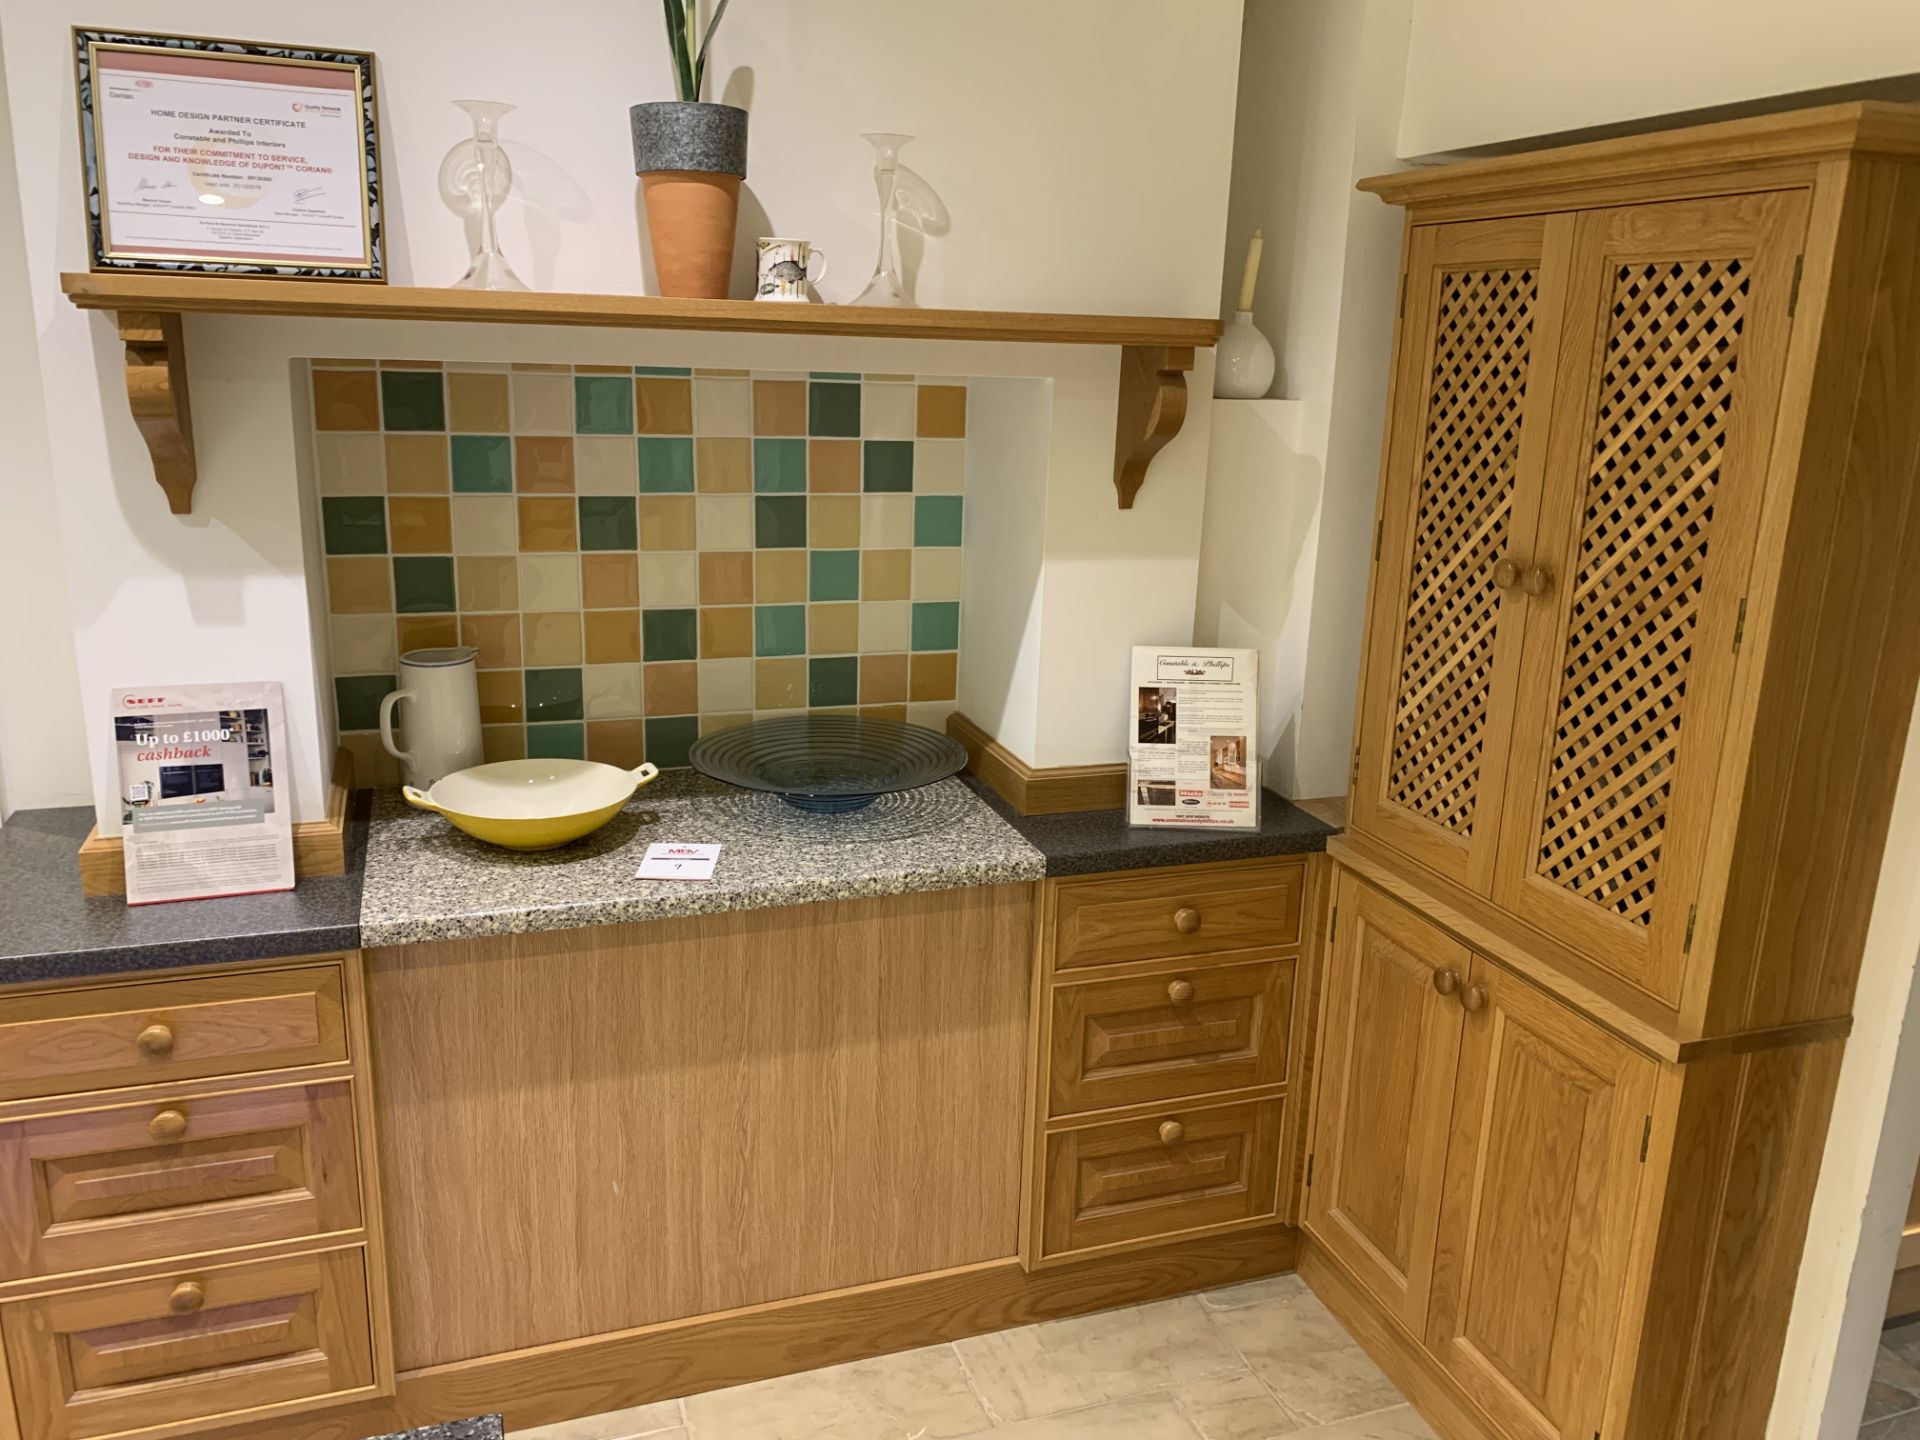 Display kitchen "range" cupboard and drawer units in pine